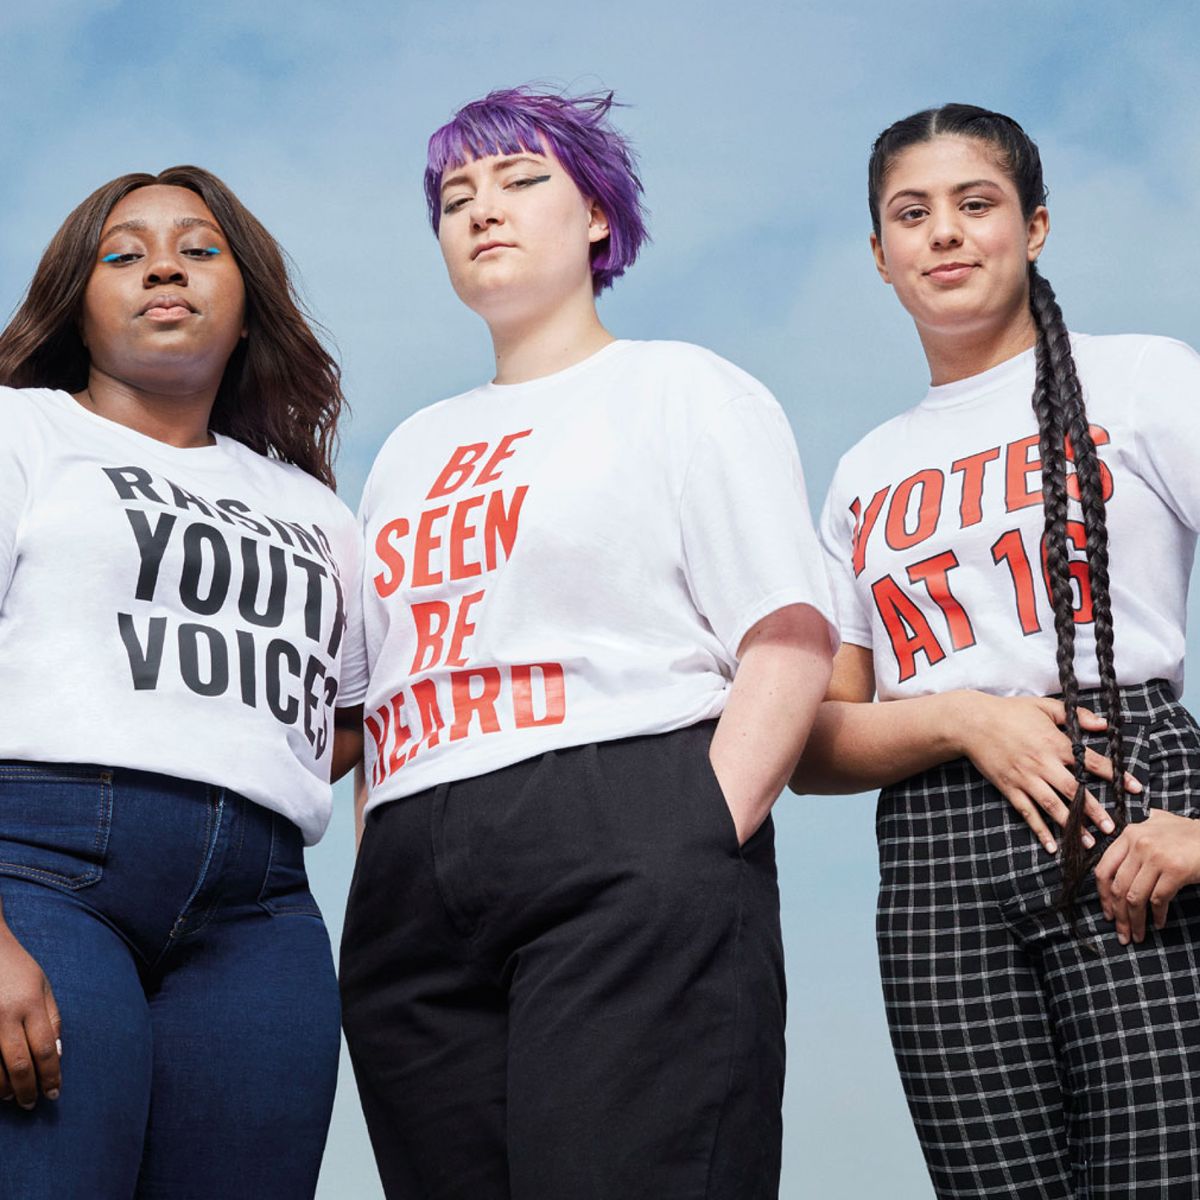 Youth Voices: meet the bright, young activists fighting for the right to be heard | Marie Claire UK